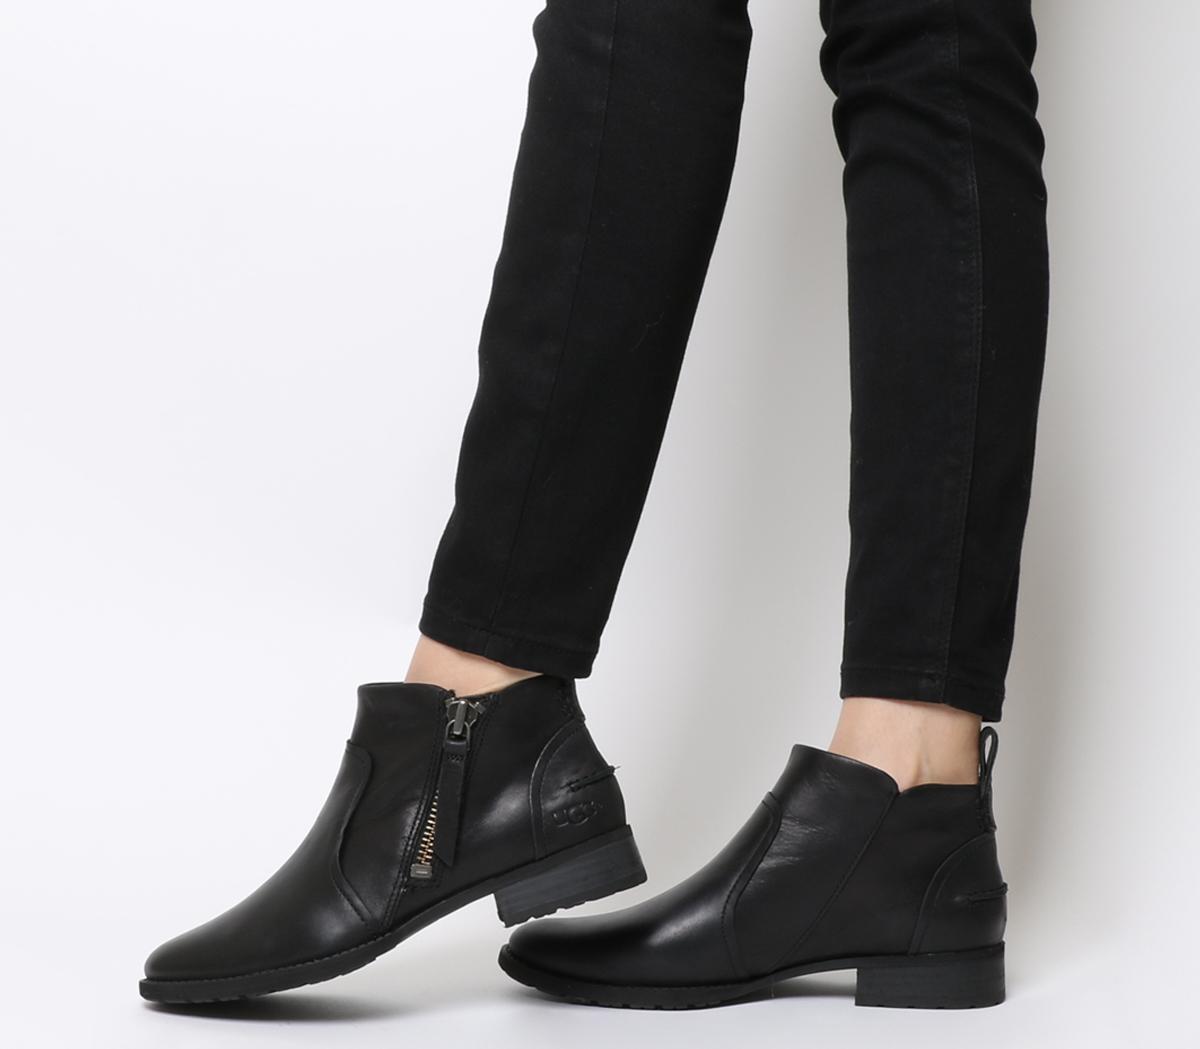 UGG Aureo Boots Black Leather - Ankle Boots